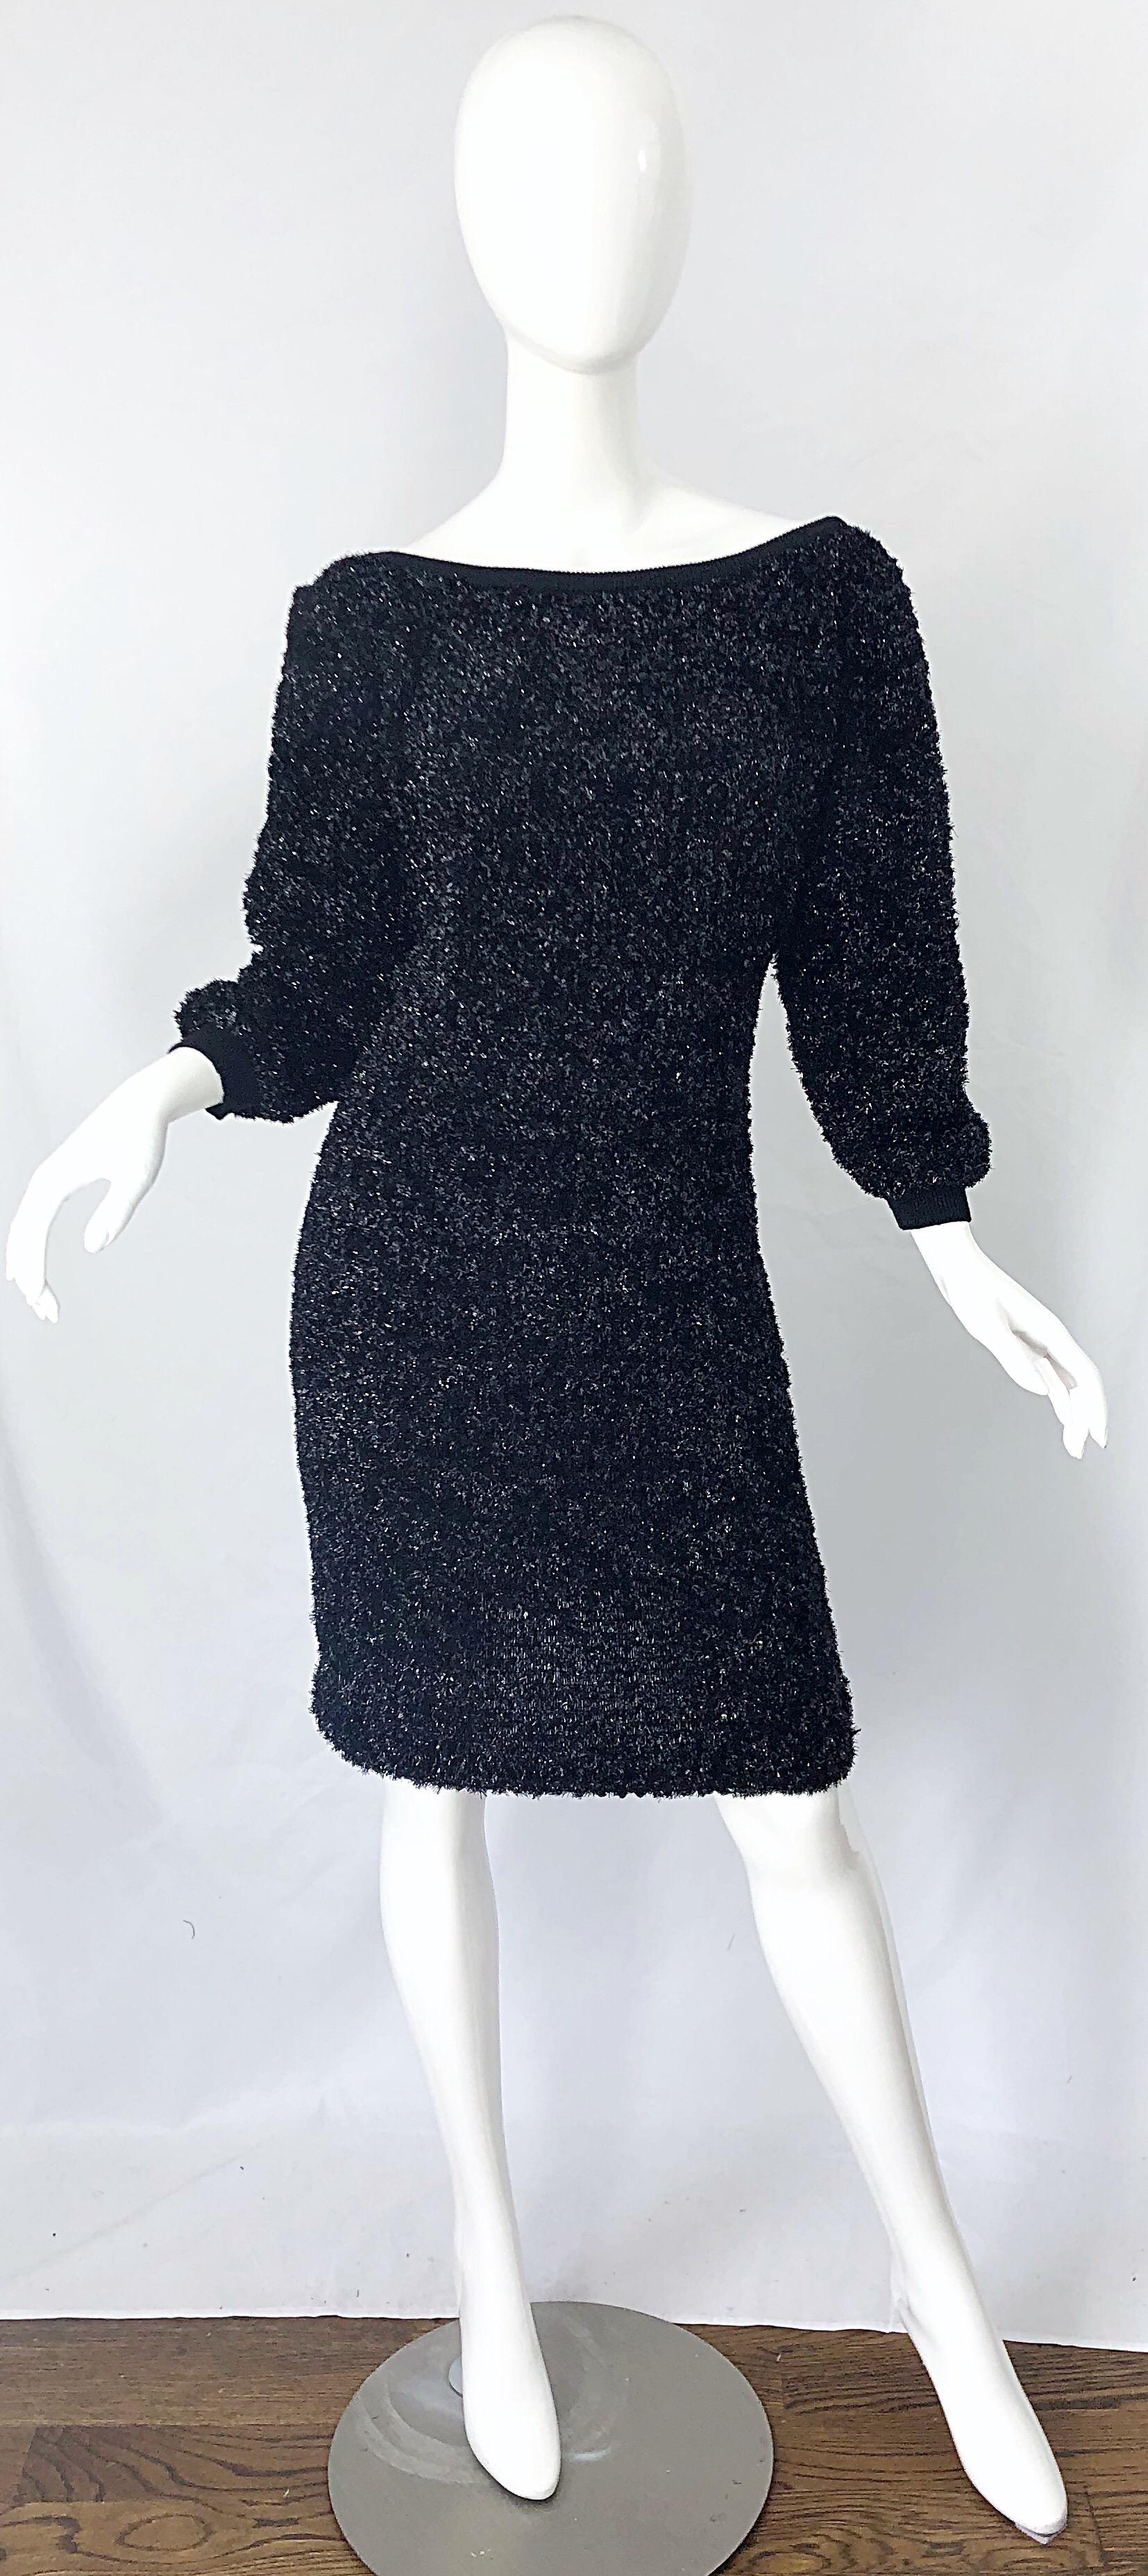 Gorgeous vintage early 90s YVES SAINT LAURENT YSL Rive Gauche off the shoulder metallic tinsel sweater dress ! At first glance, this looks like a sequined dress. However, it is really black metallic tinsel. Slight off the shoulder fit with a deep